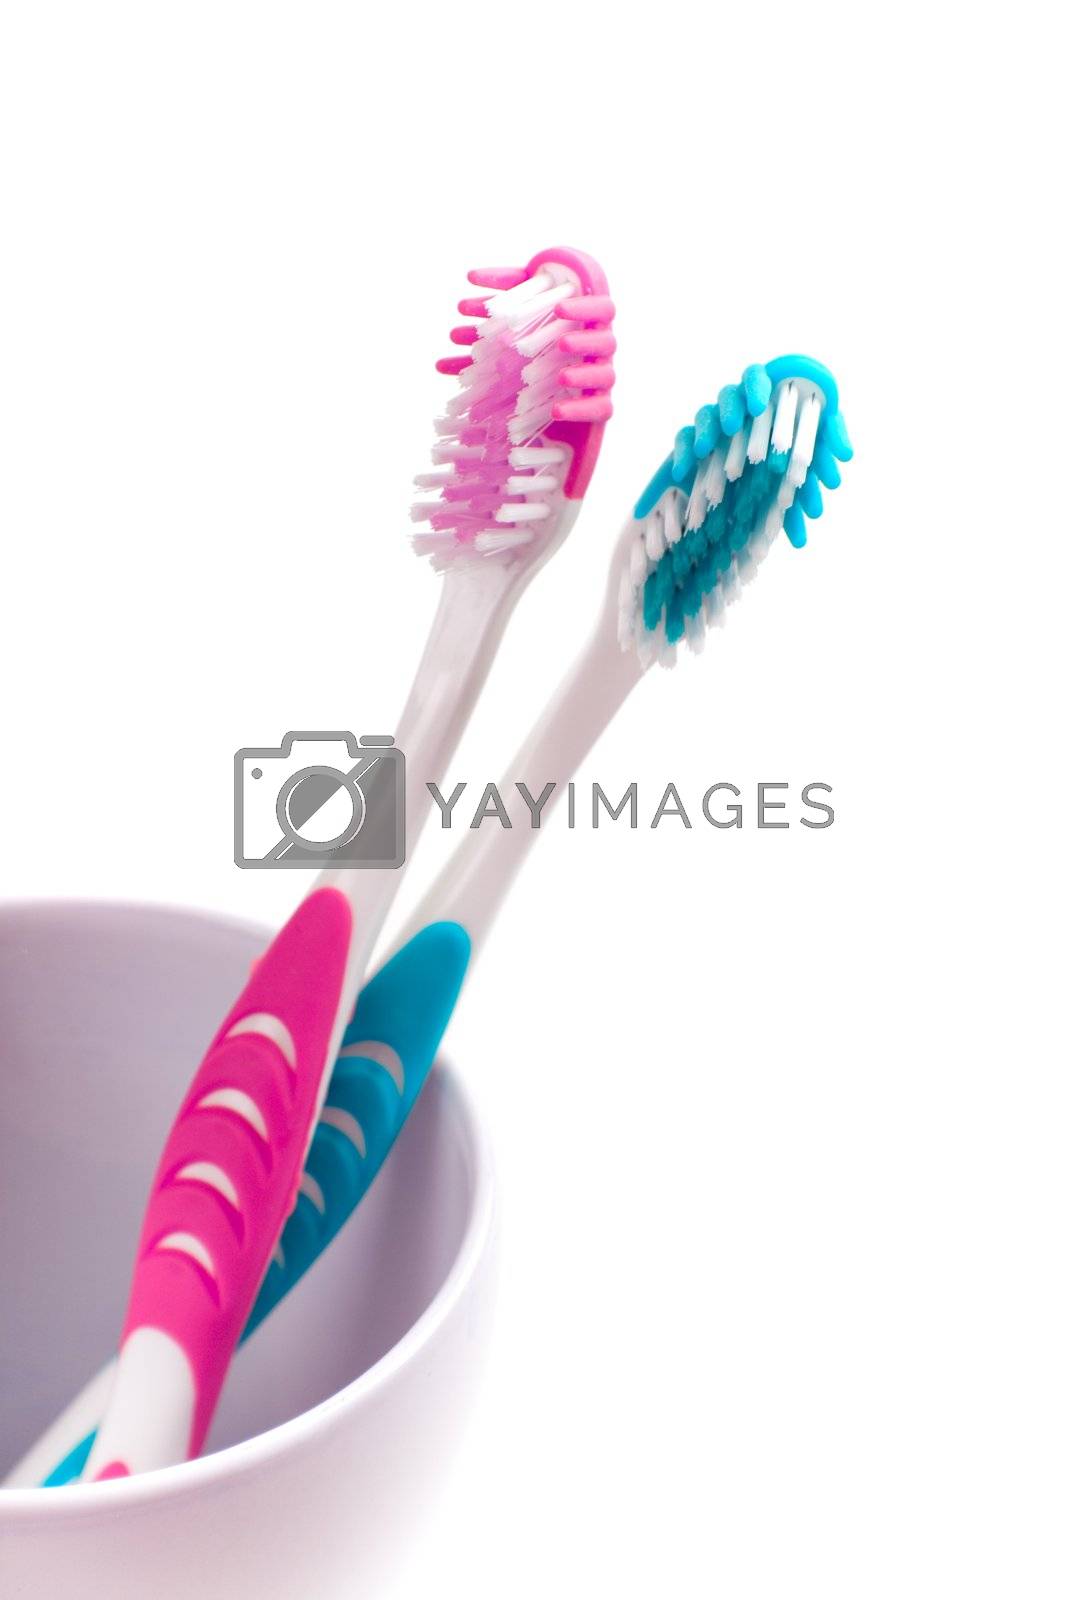 Royalty free image of two toothbrushes by marylooo